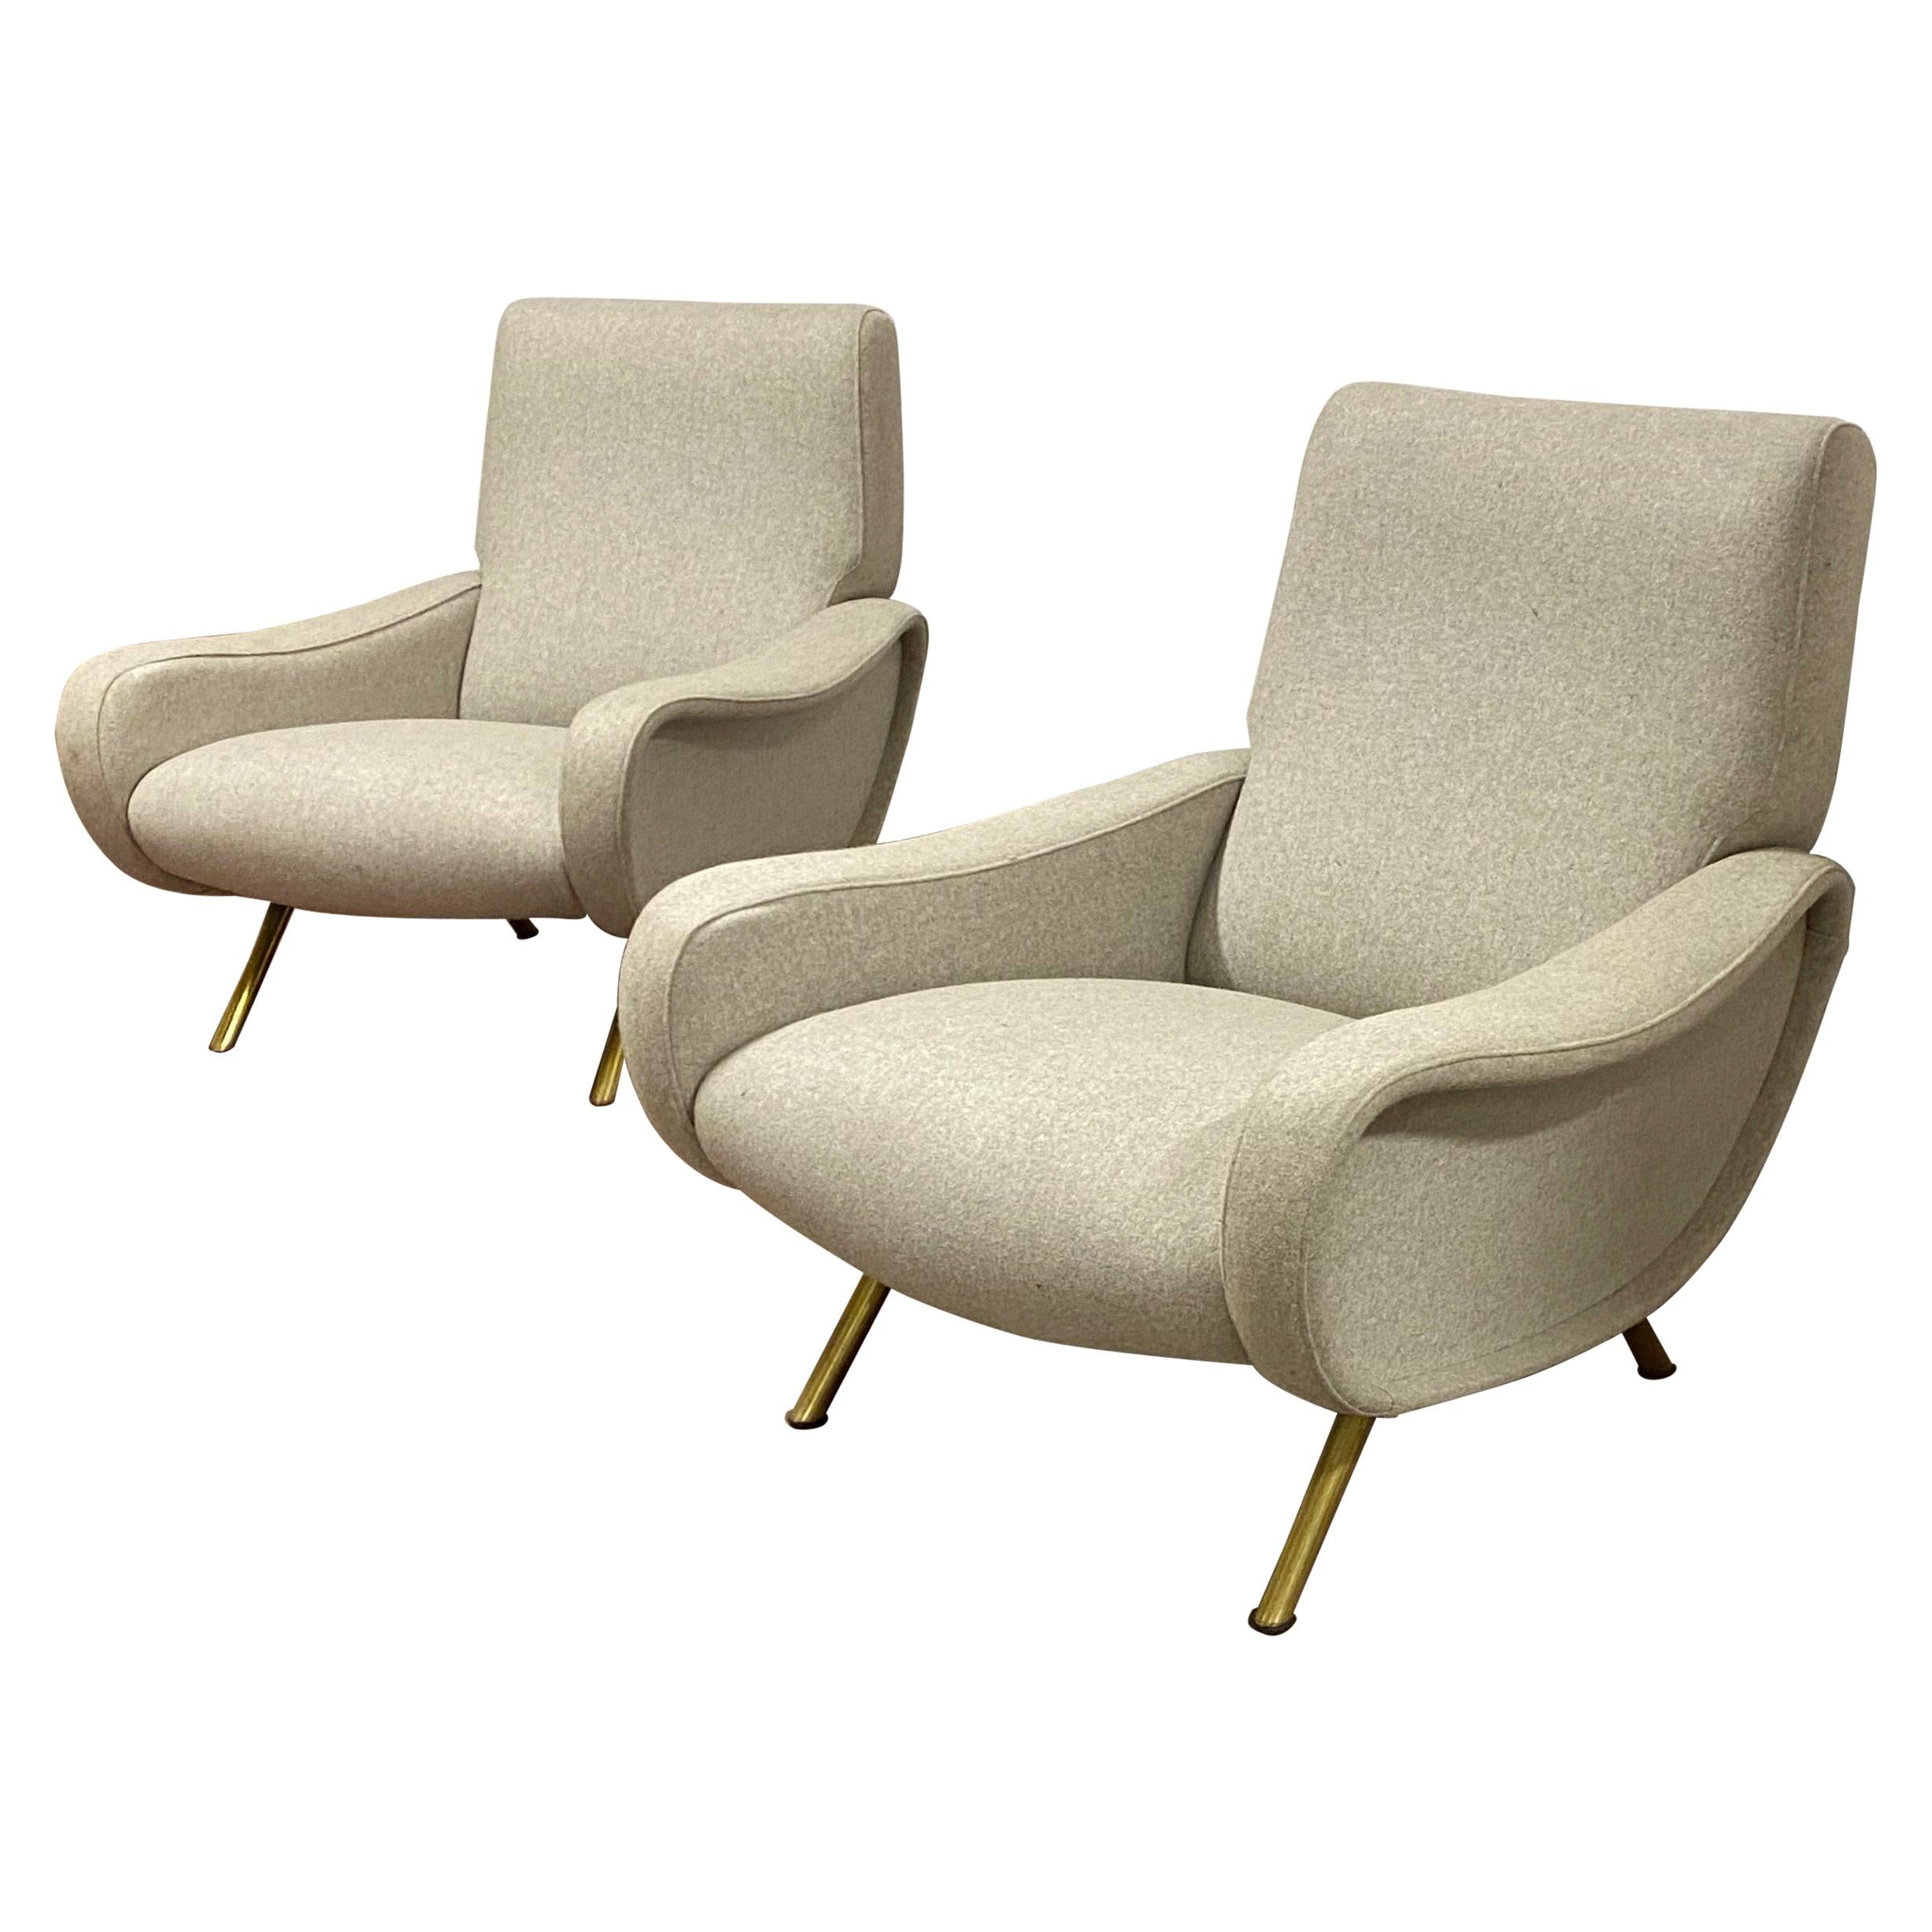 Marco Zanuso Pair of Lady Chairs Covered in Kvadrat Wool Cloth